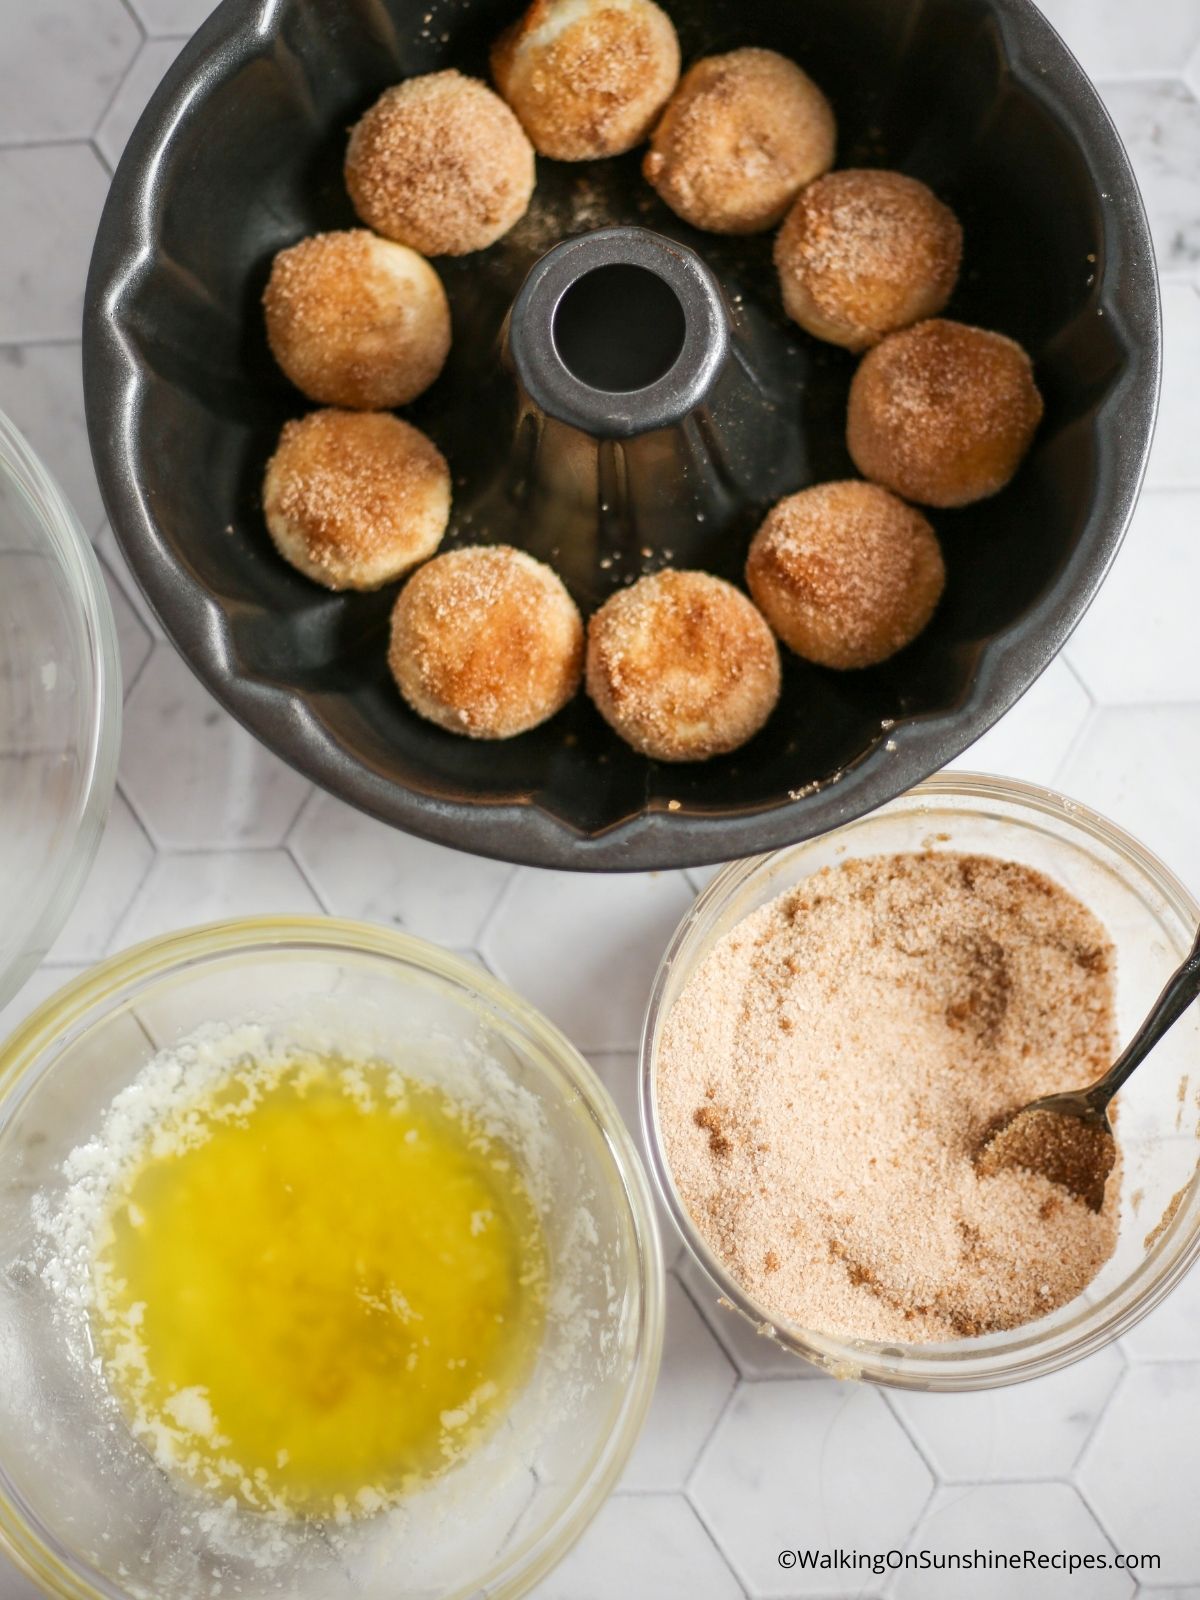 dip rolls in melted butter and cinnamon sugar.